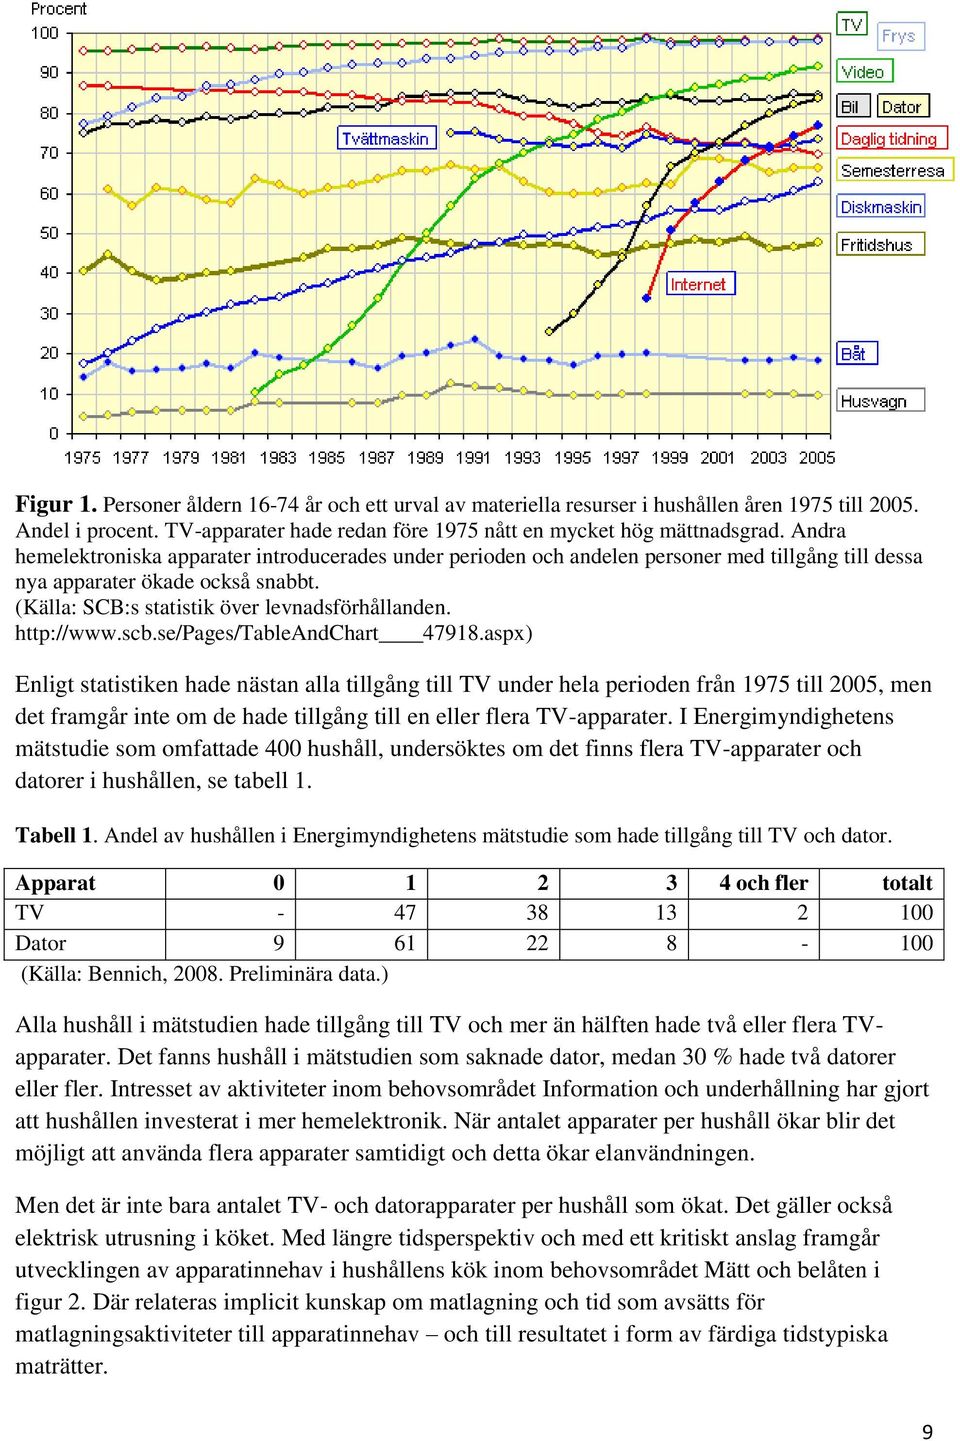 http://www.scb.se/pages/tableandchart 47918.